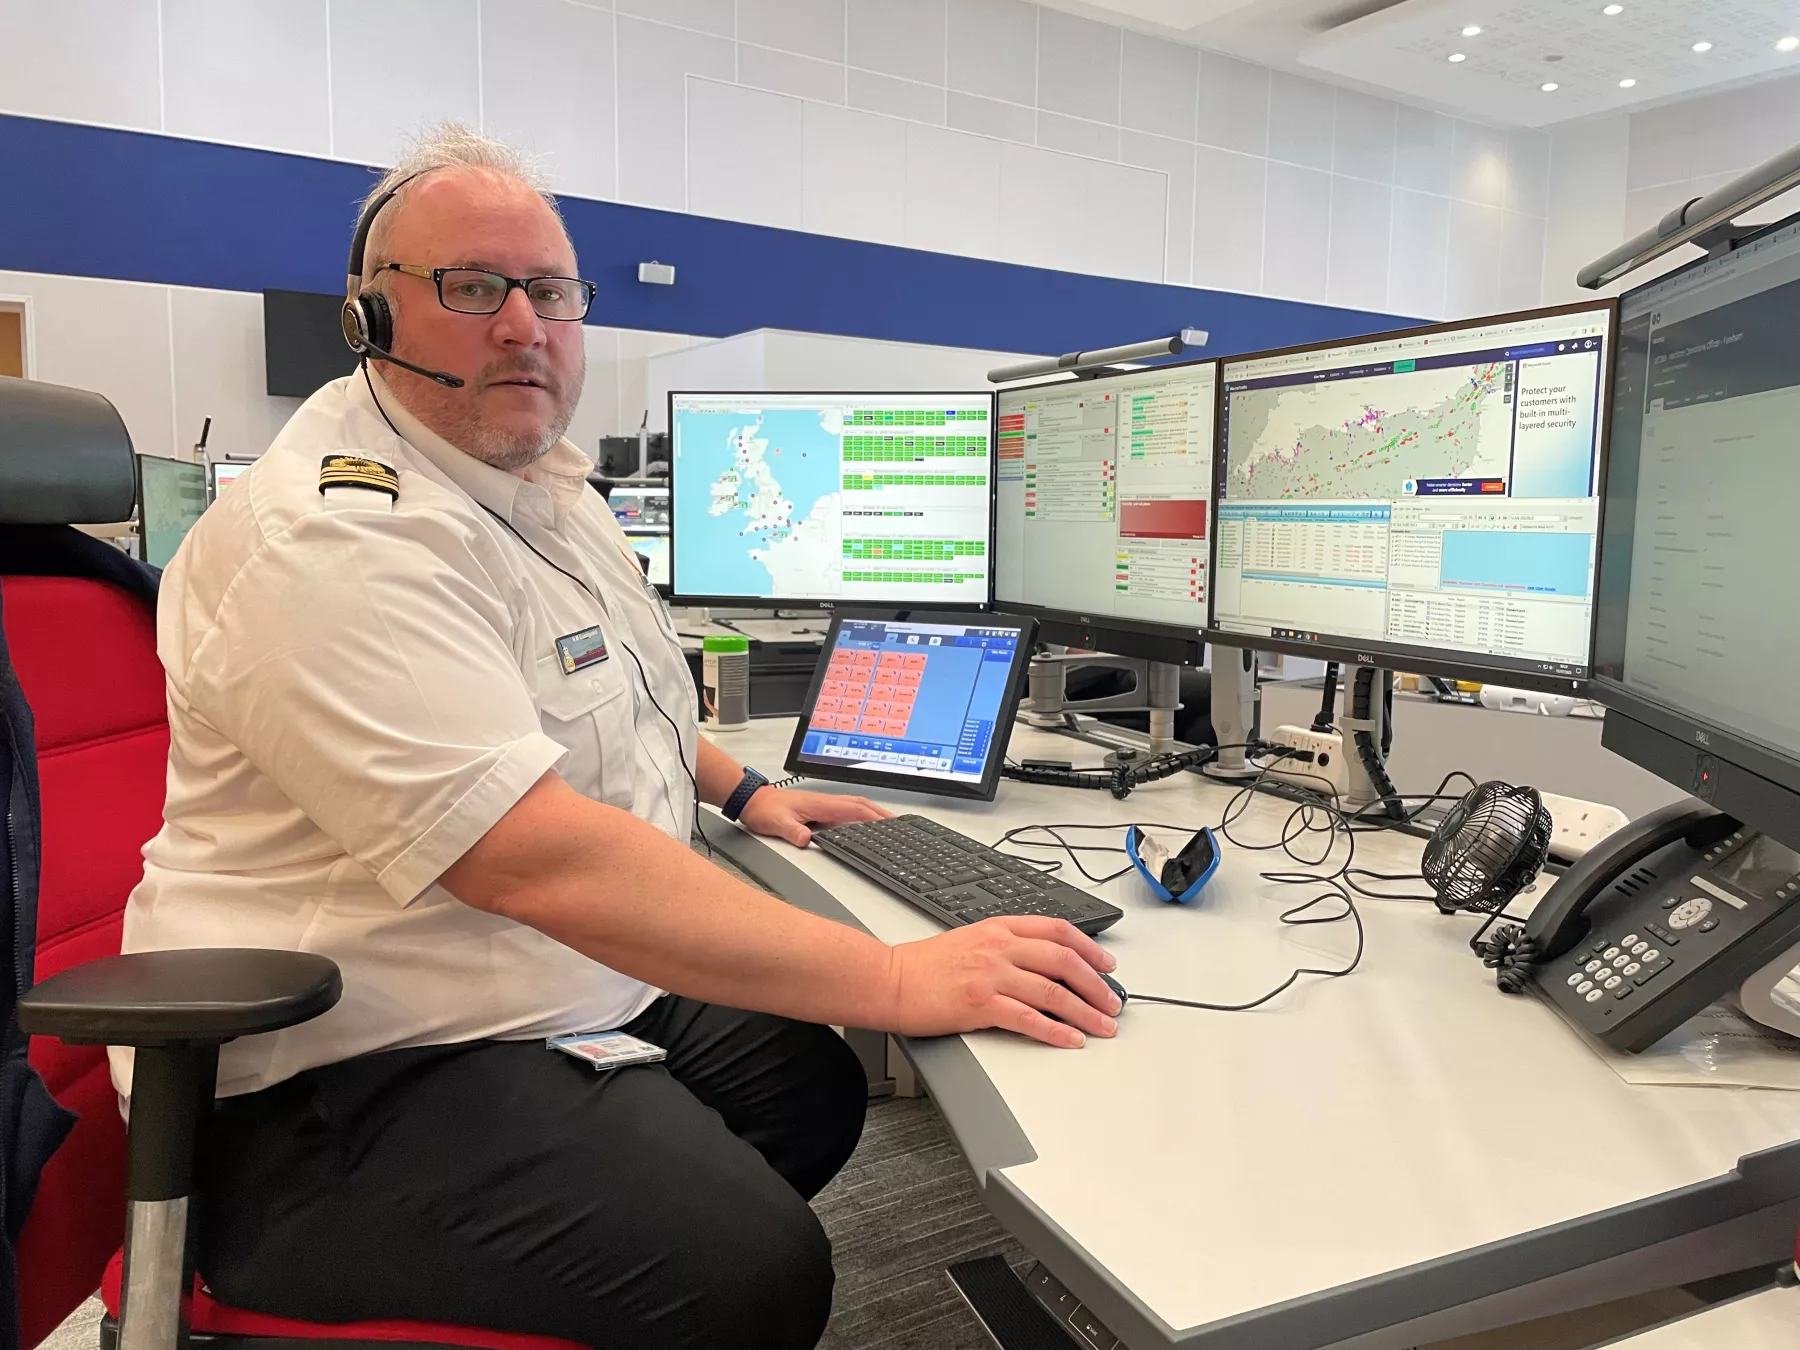 Coastguard in an operations room with headset